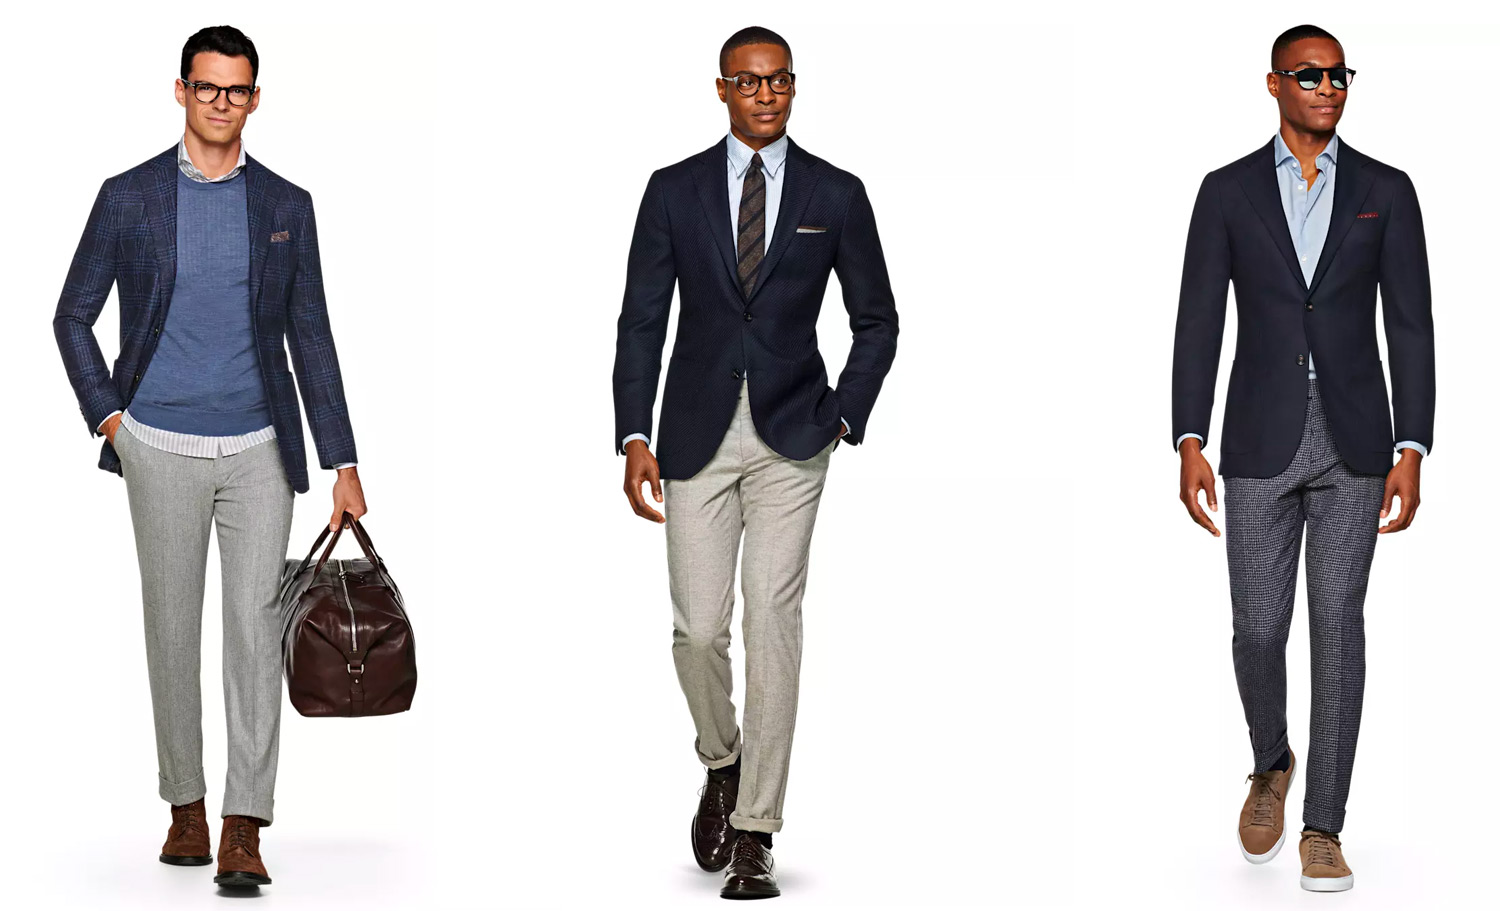 Dress for success: read these 5 Top 